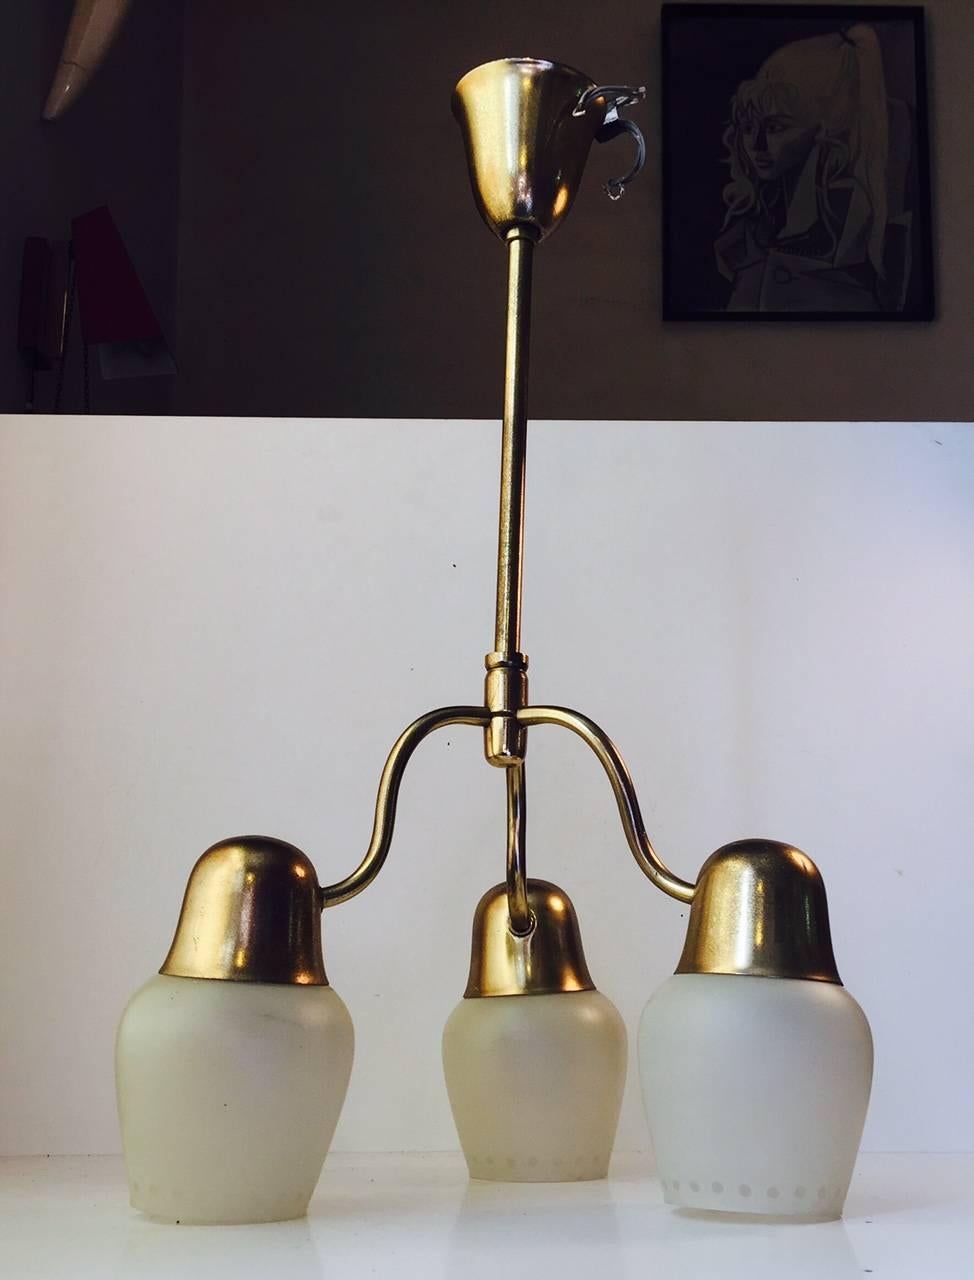 A round brass ceiling light with three dotted opaline glass shades. It features organic shapes and curves and was manufactured by ASEA in Sweden during the 1940s or early 1950s in a style reminiscent of Hans Bergstrom and Vilhelm Lauritzen. It has a